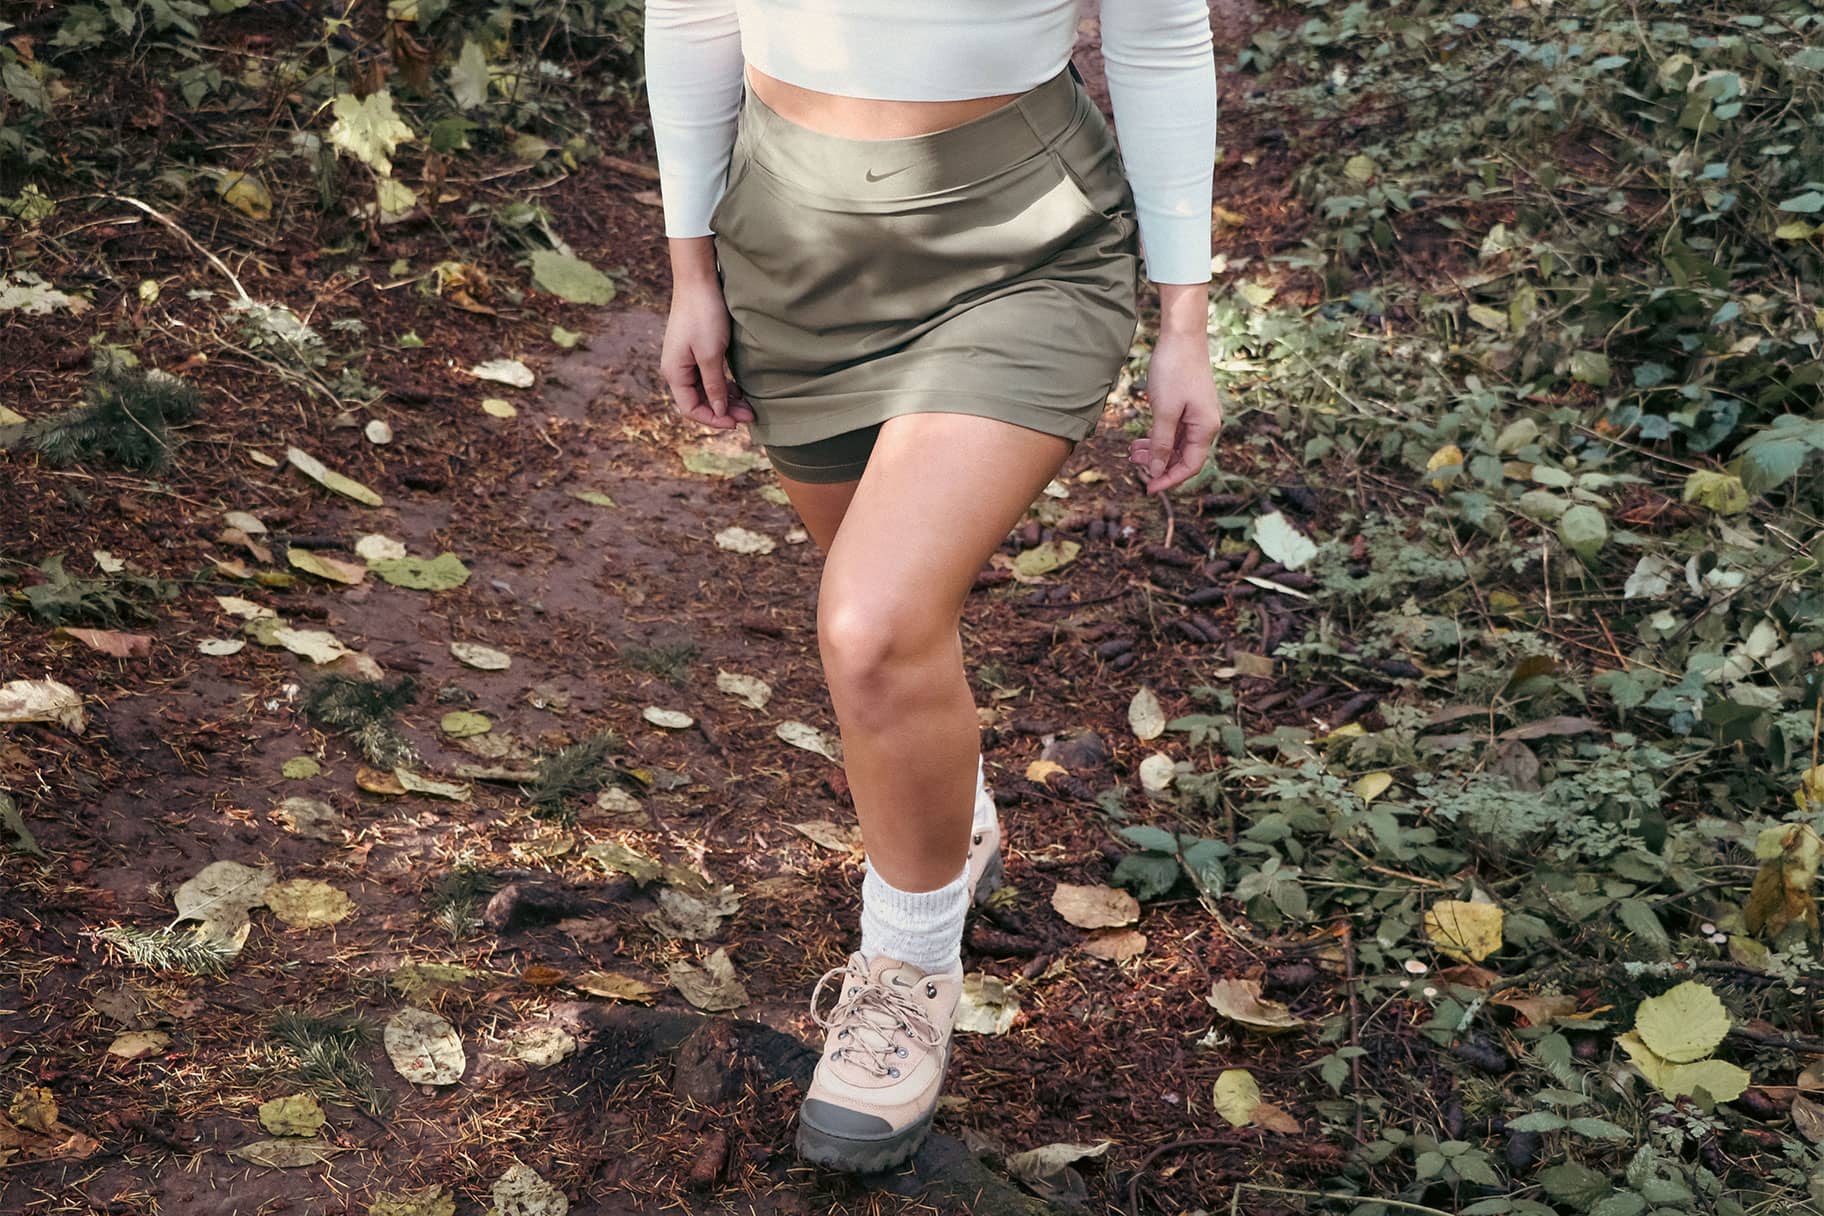 The 7 Best Nike Skirts for Hiking 